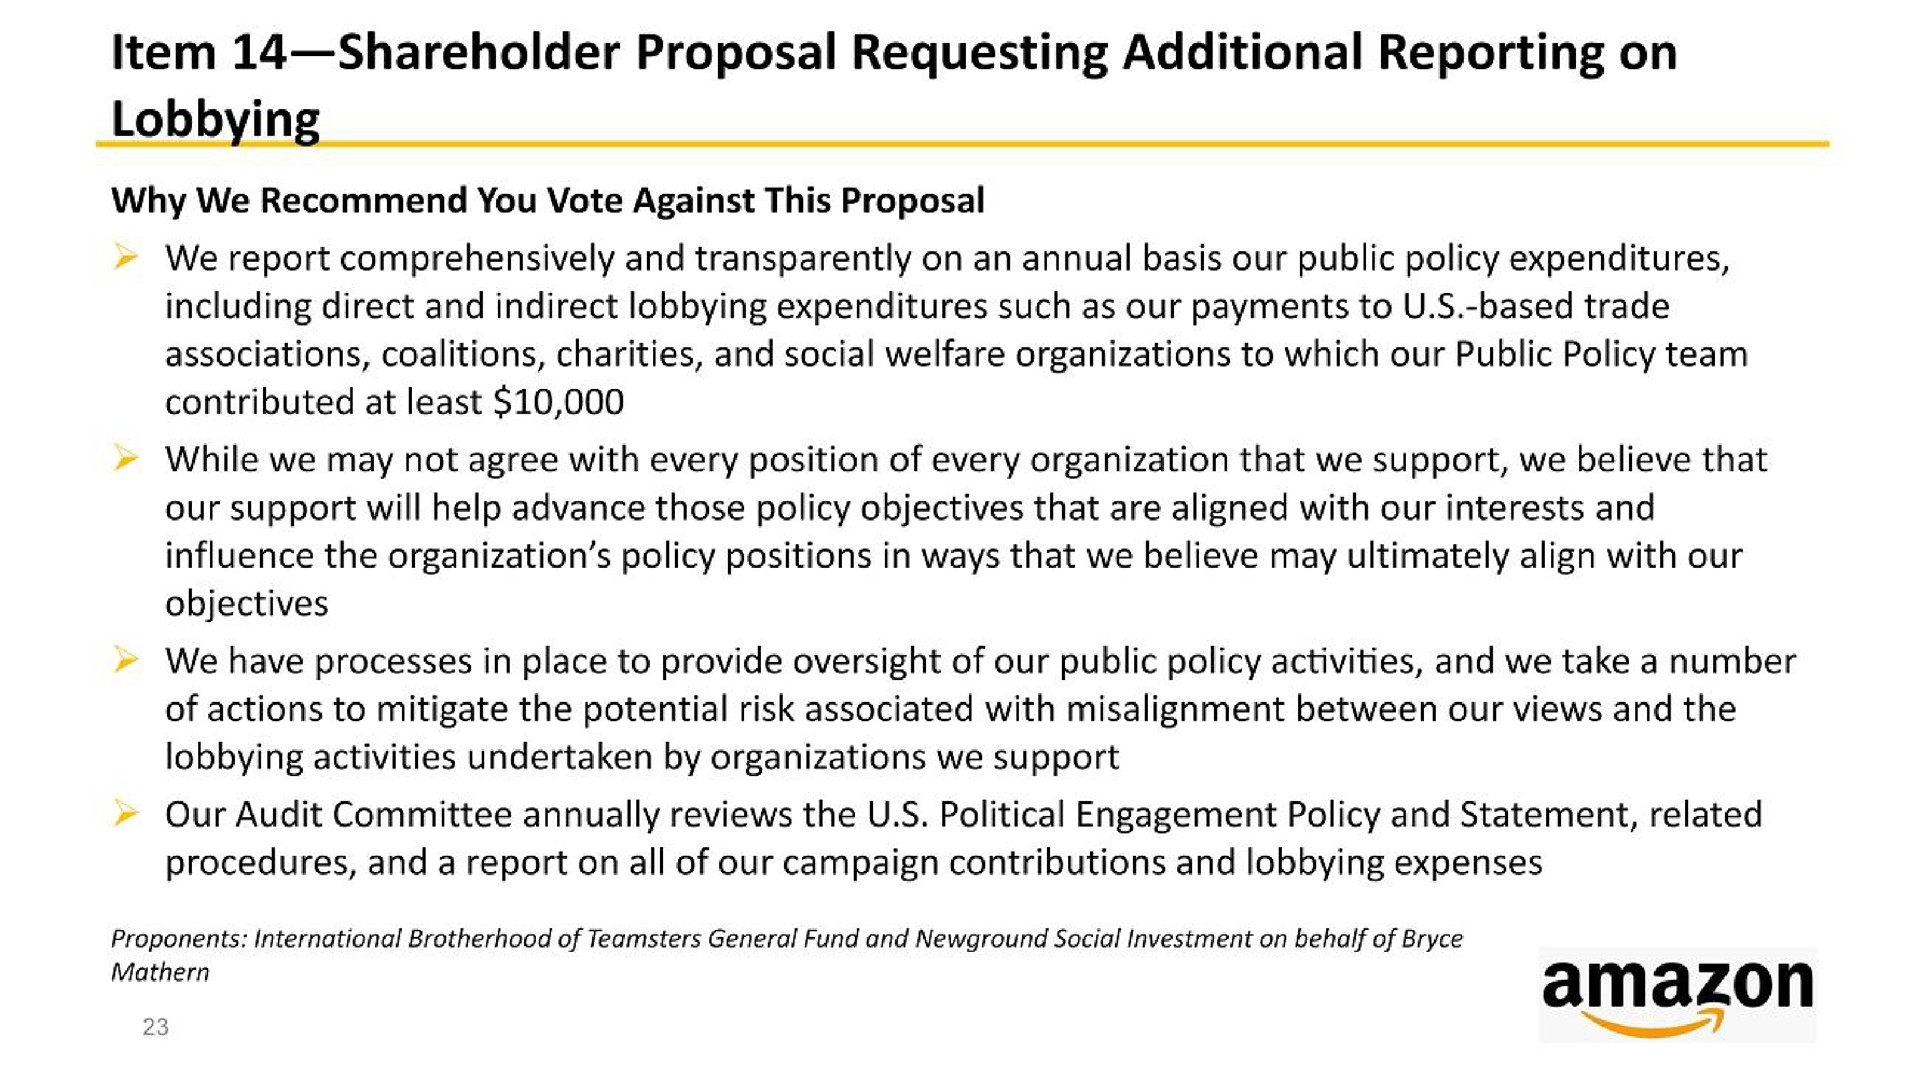 item shareholder proposal requesting additional reporting on lobbying | Amazon